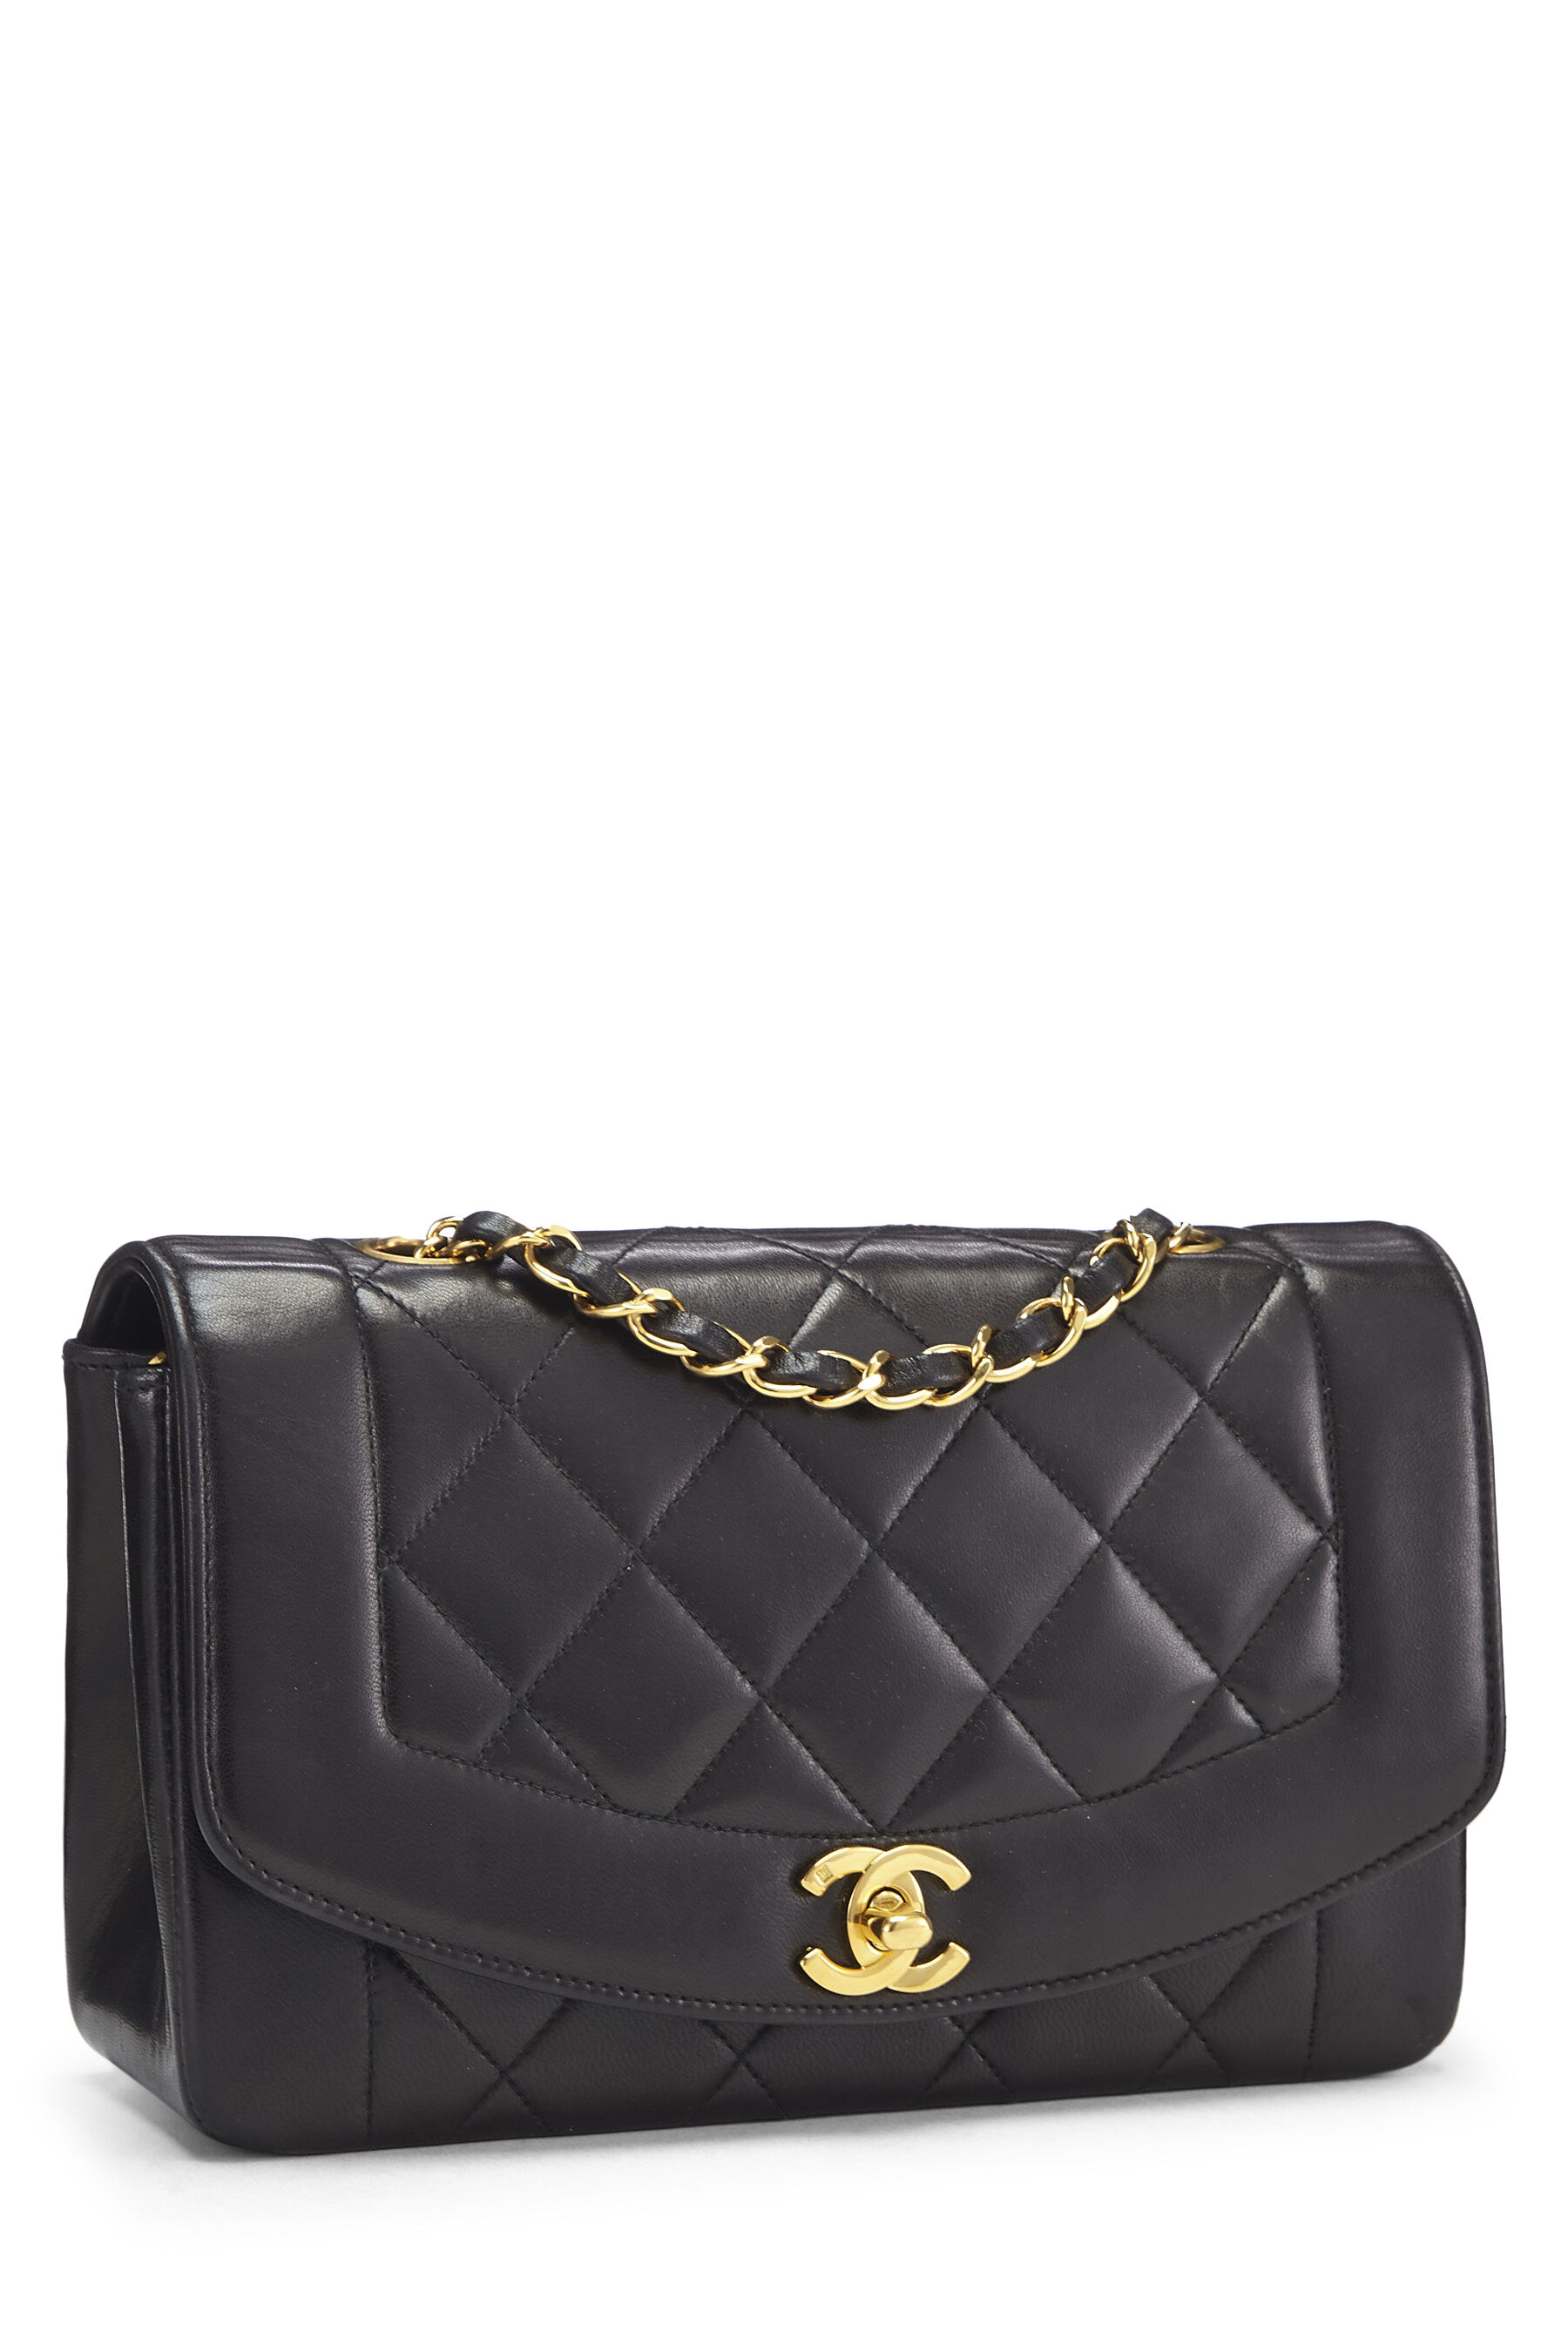 Chanel - Black Quilted Lambskin Diana Flap Small